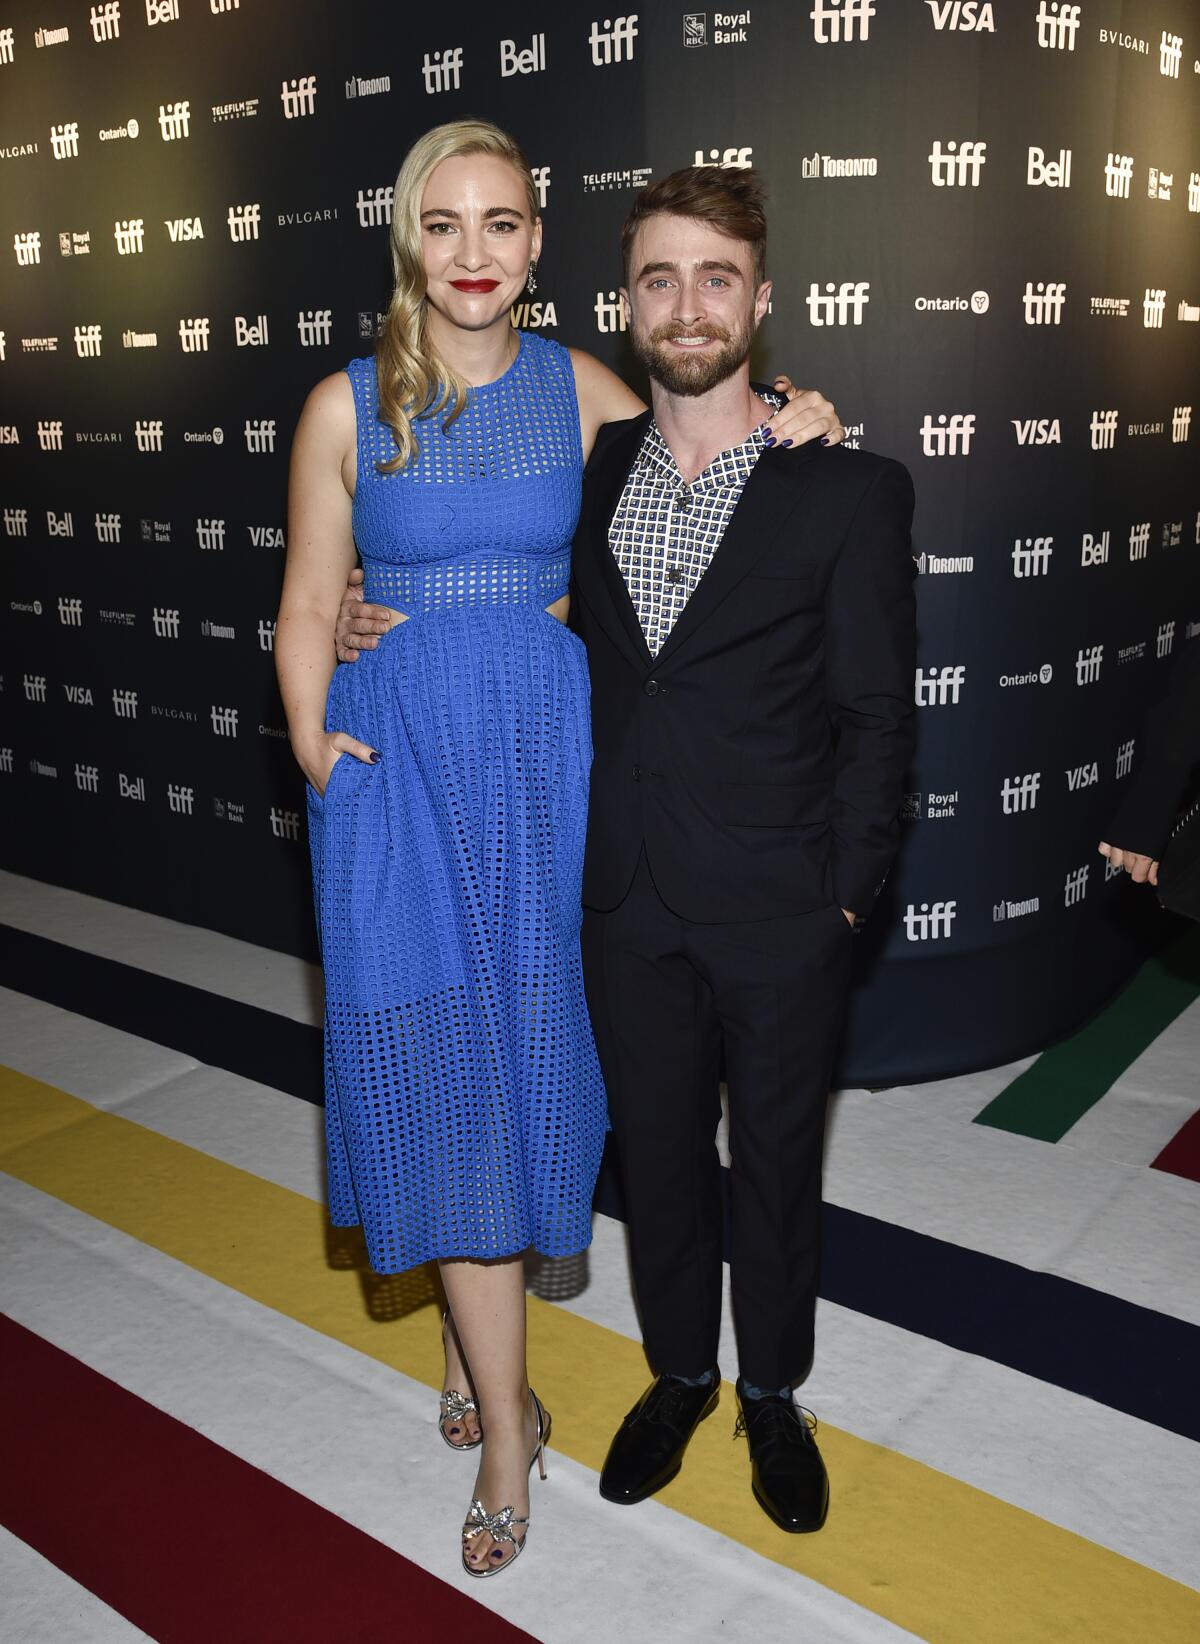 Erin Darke in a bright blue gown standing next to Daniel Radcliffe in a checkered shirt and black suit